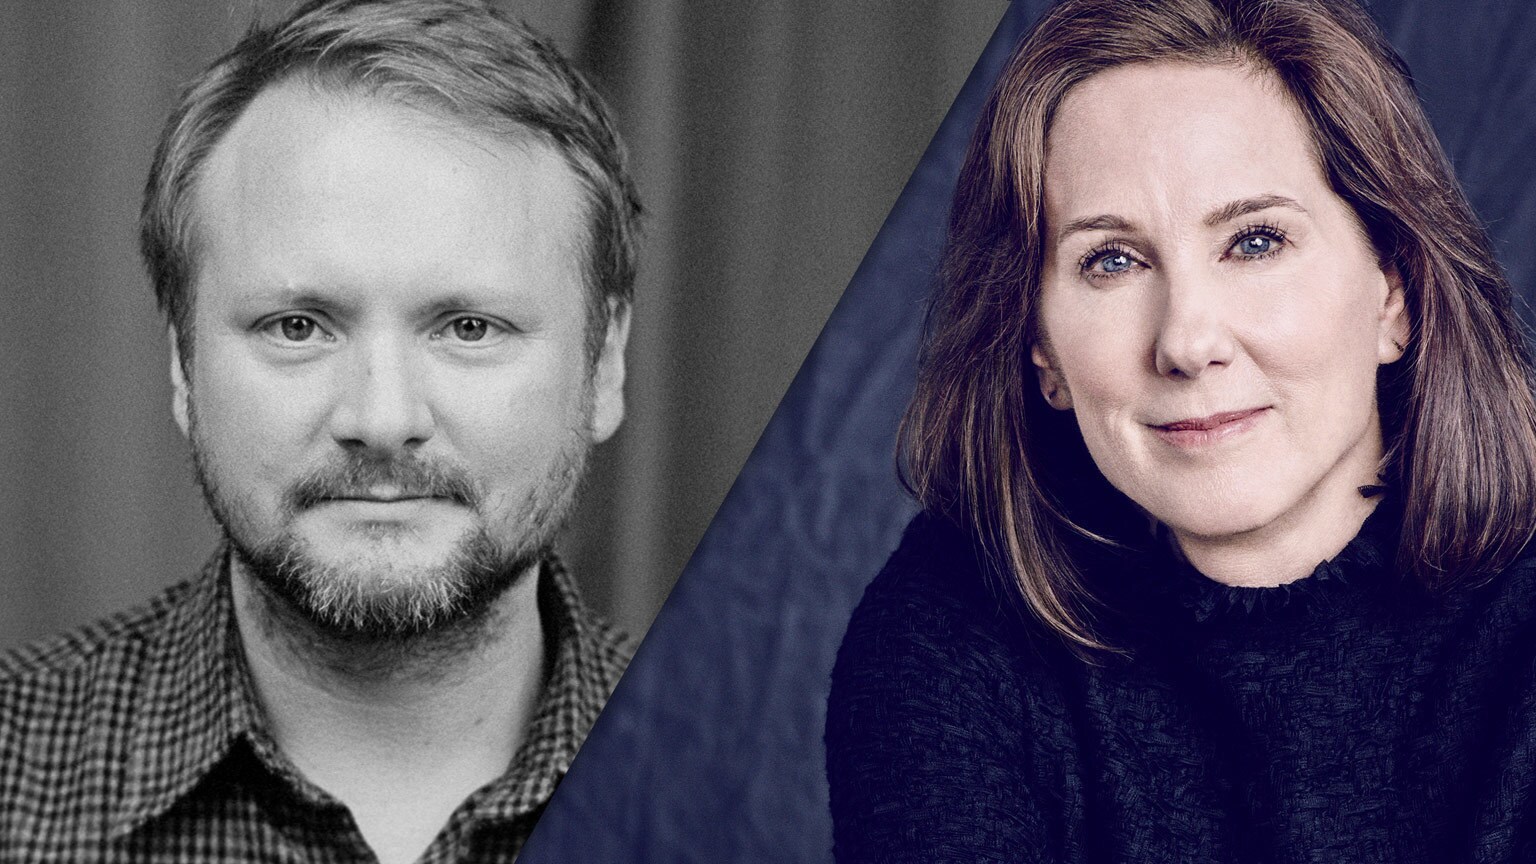 Kathleen Kennedy and Star Wars: The Last Jedi Director Rian Johnson to Appear at Star Wars Celebration